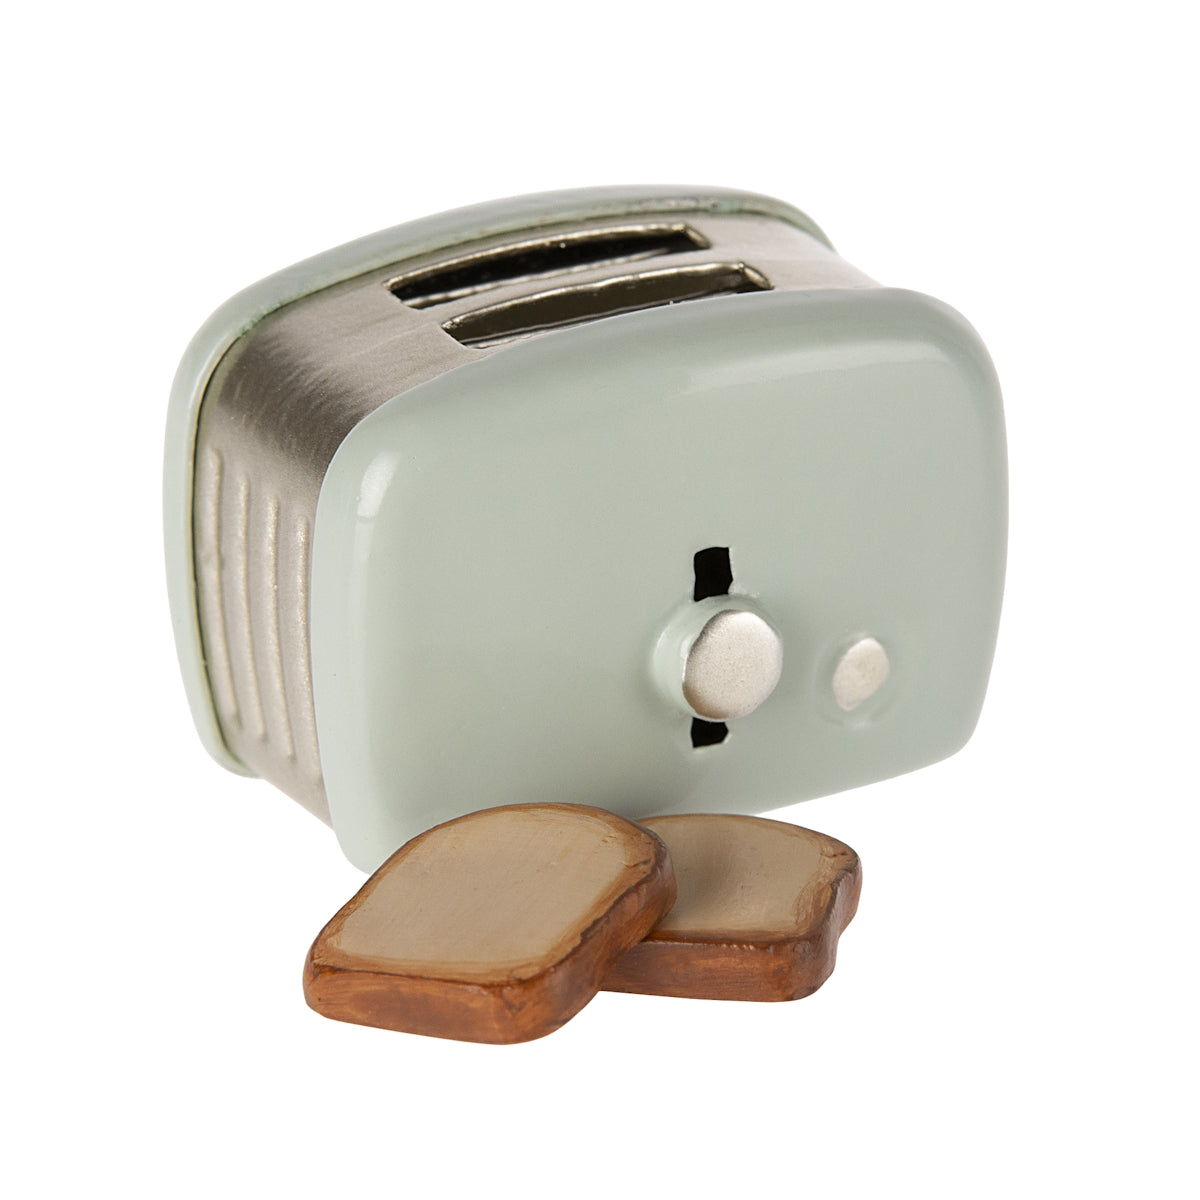 Maileg Toaster Mouse Mint